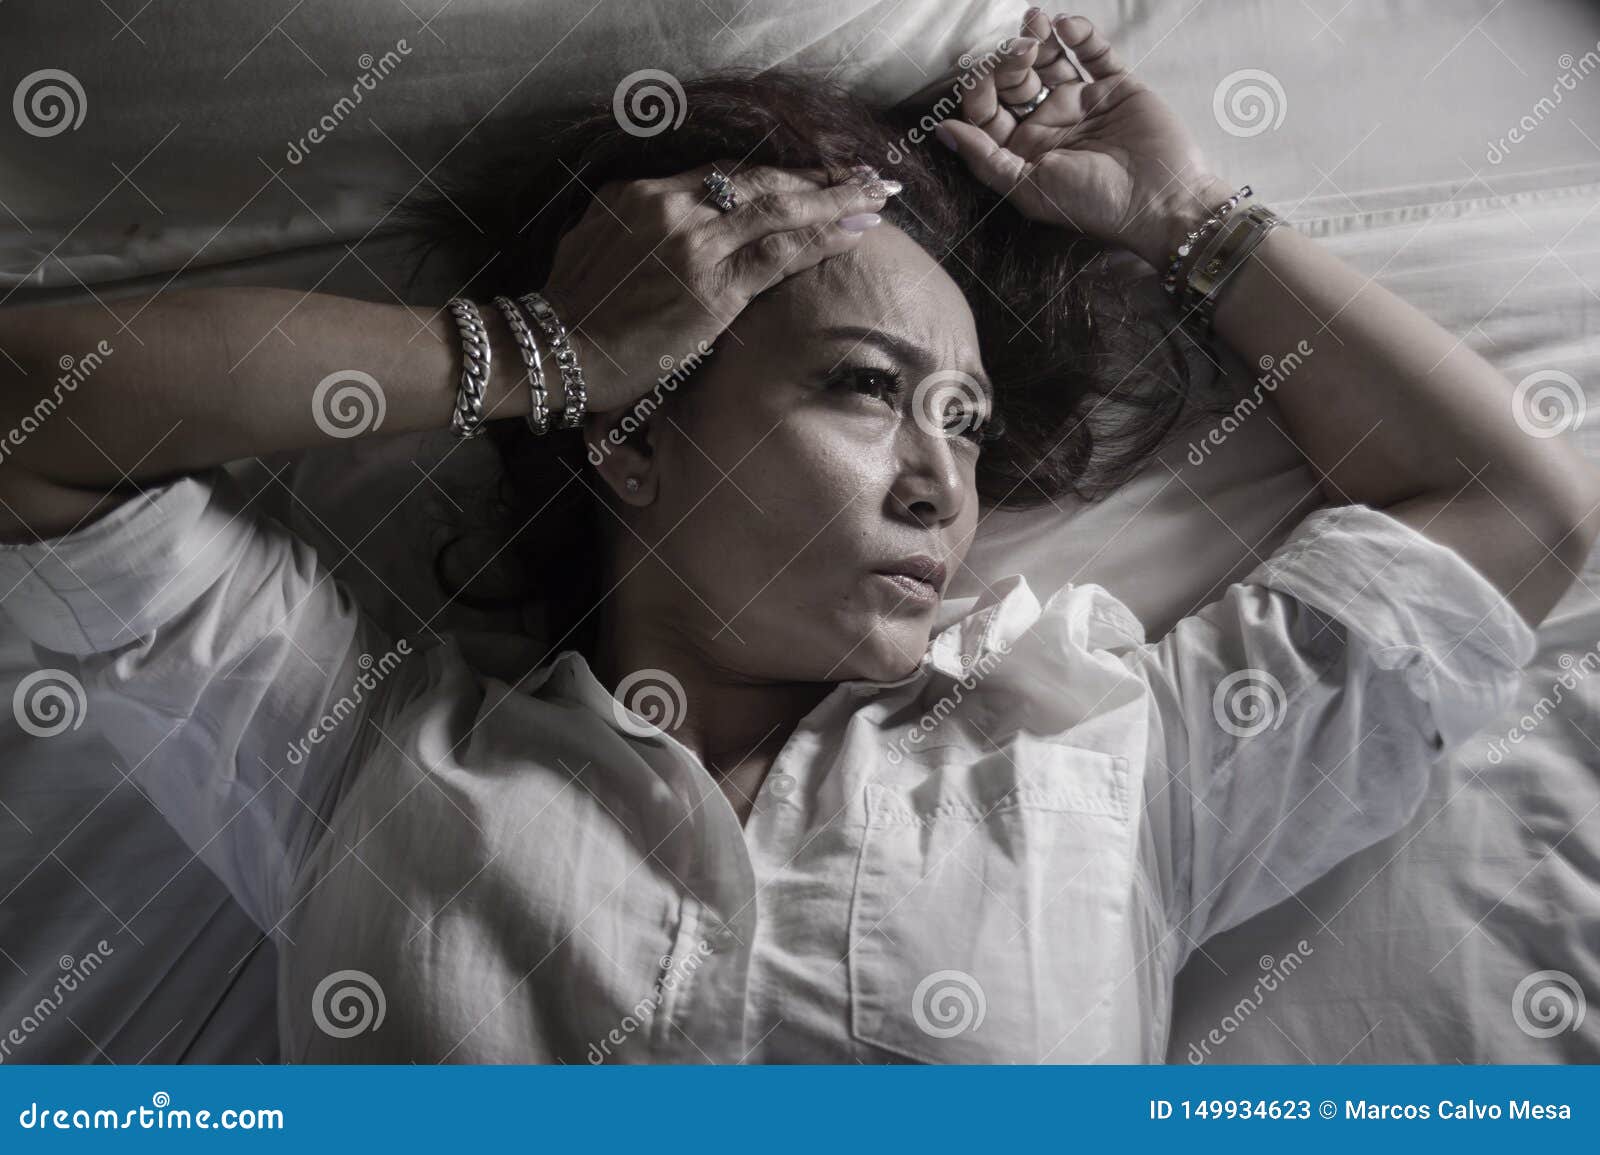 Dramatic Lifestyle Portrait Of Attractive Sad And ...